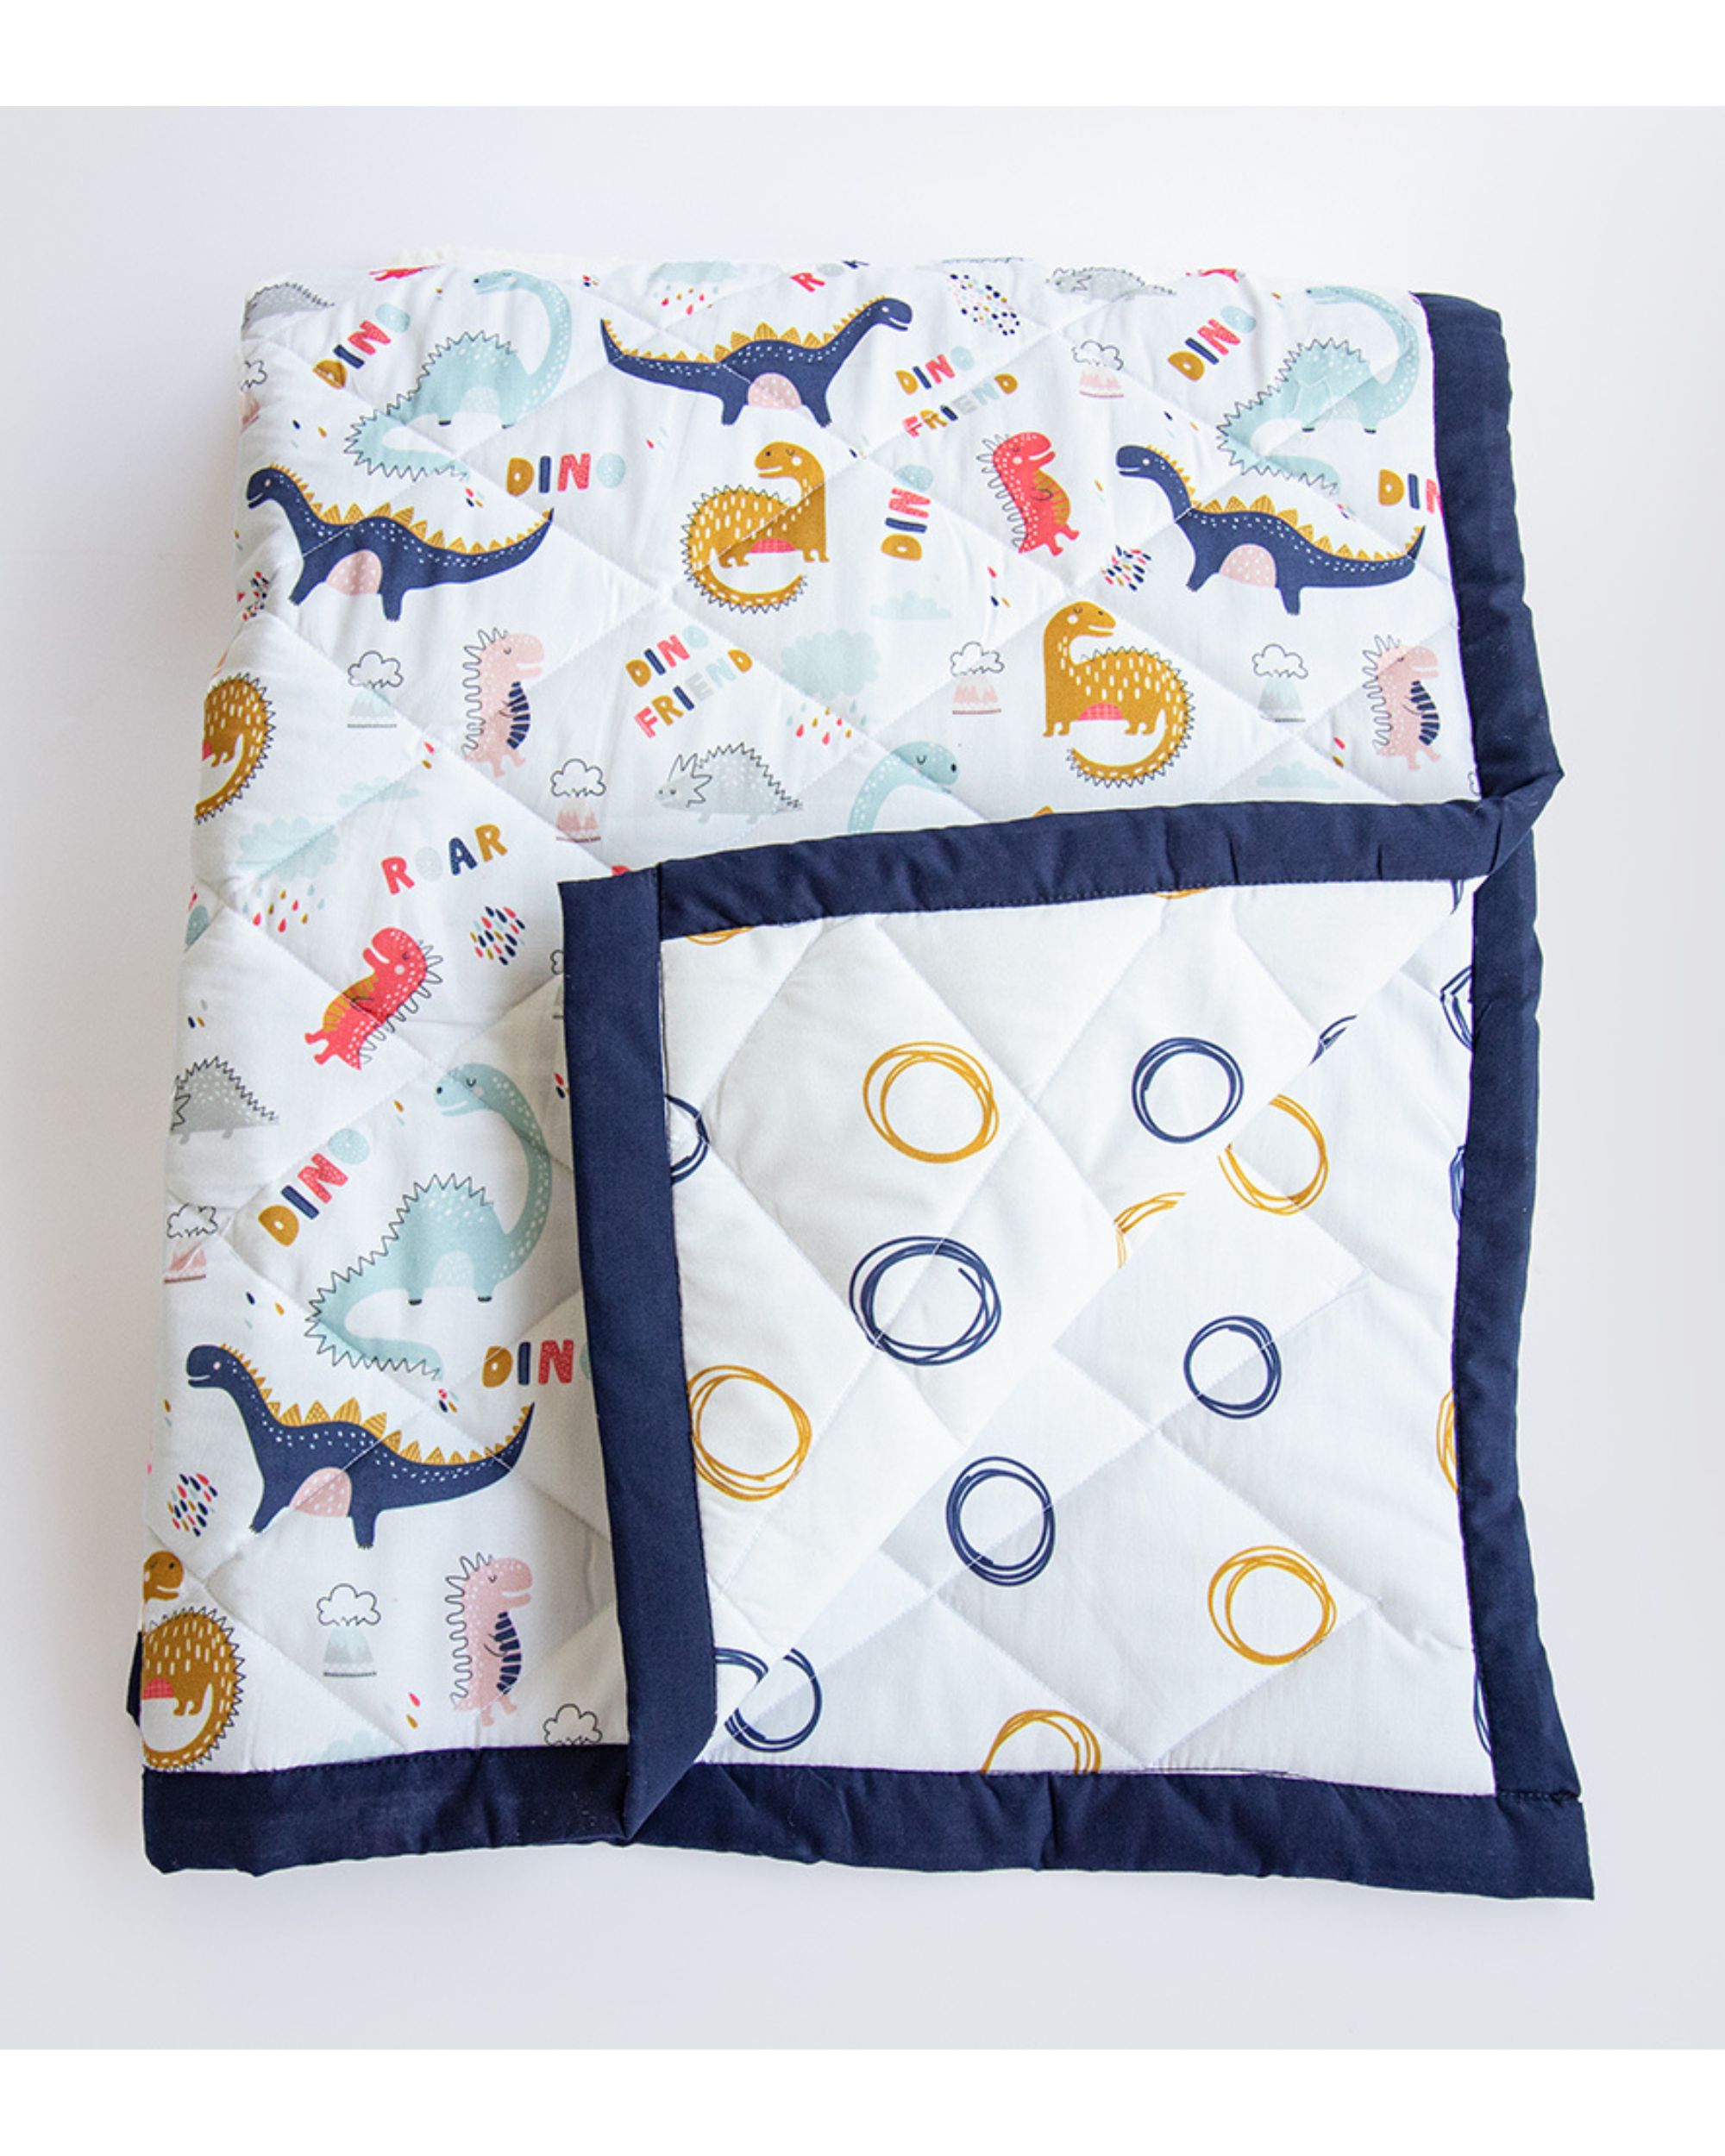 Dino themed reversible quilt